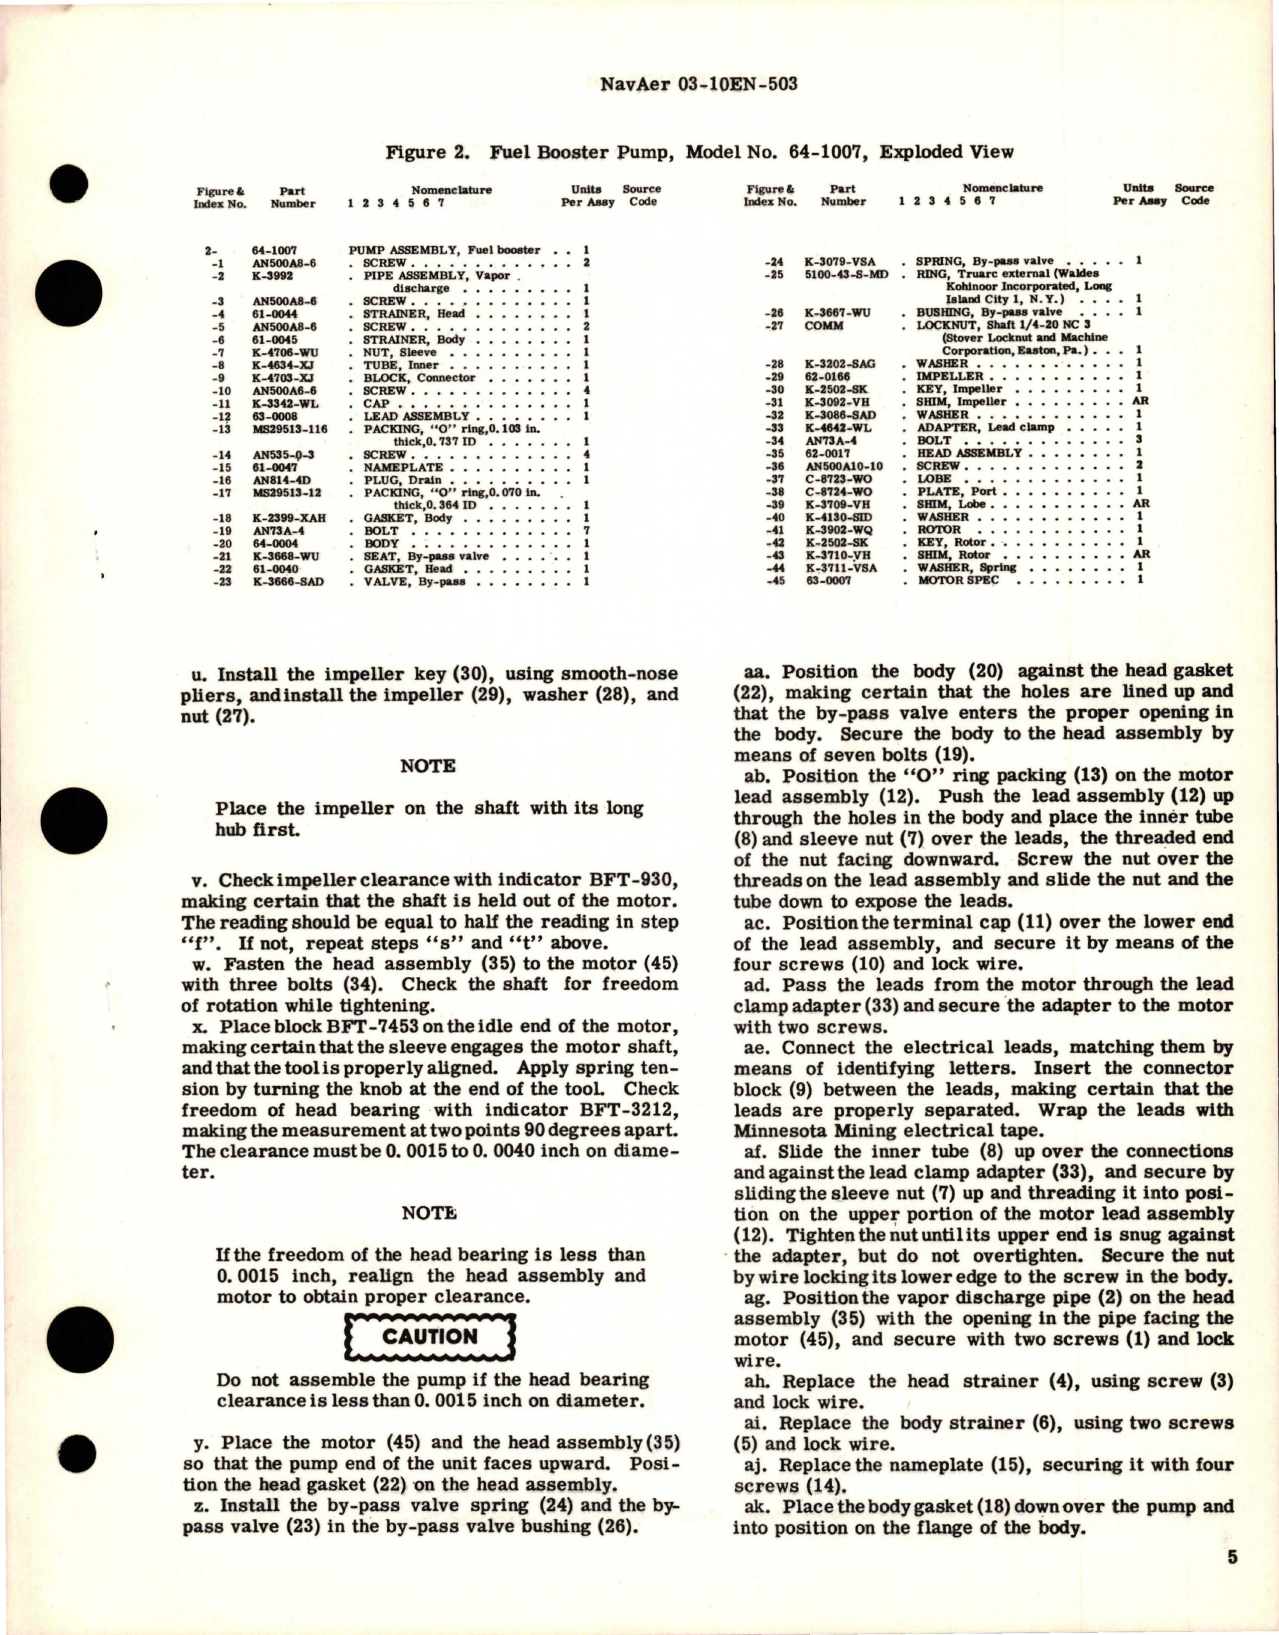 Sample page 5 from AirCorps Library document: Overhaul Instructions with Parts Breakdown for Fuel Booster Pump - Model 64-1007